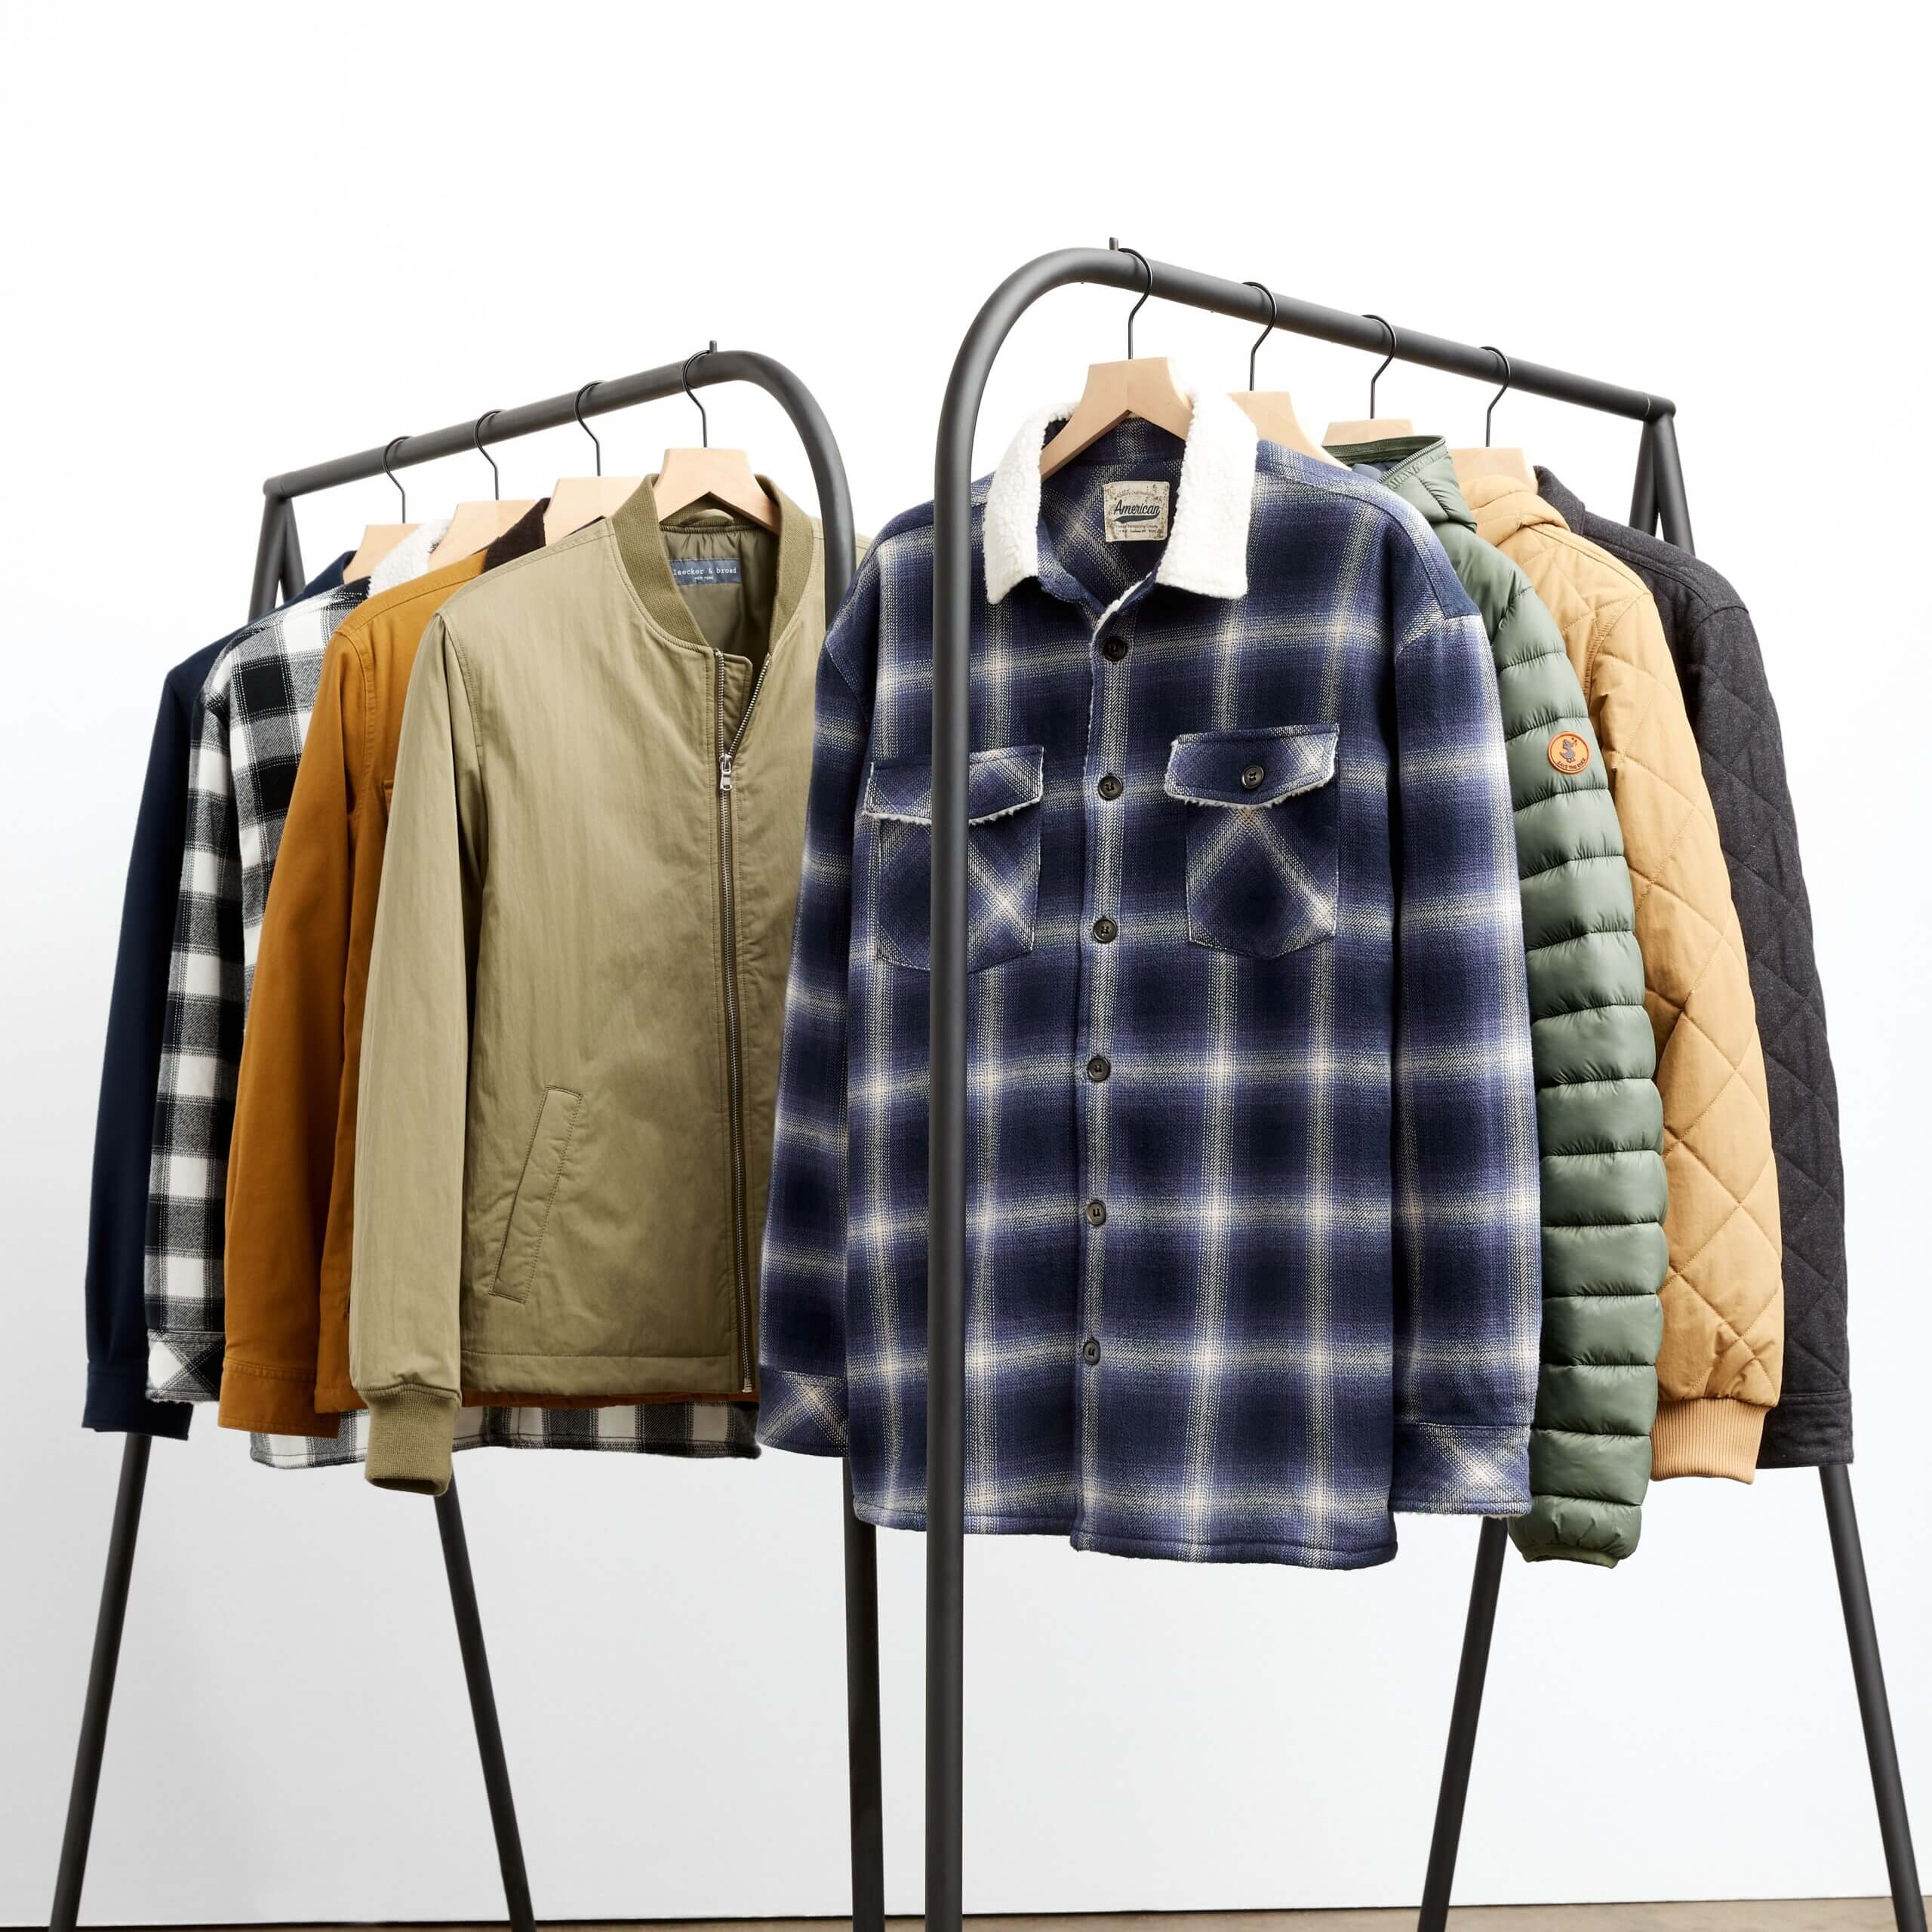 Stitch Fix men's collection of jackets hanging on rack including shackets, puffer jackets and bomber jackets.